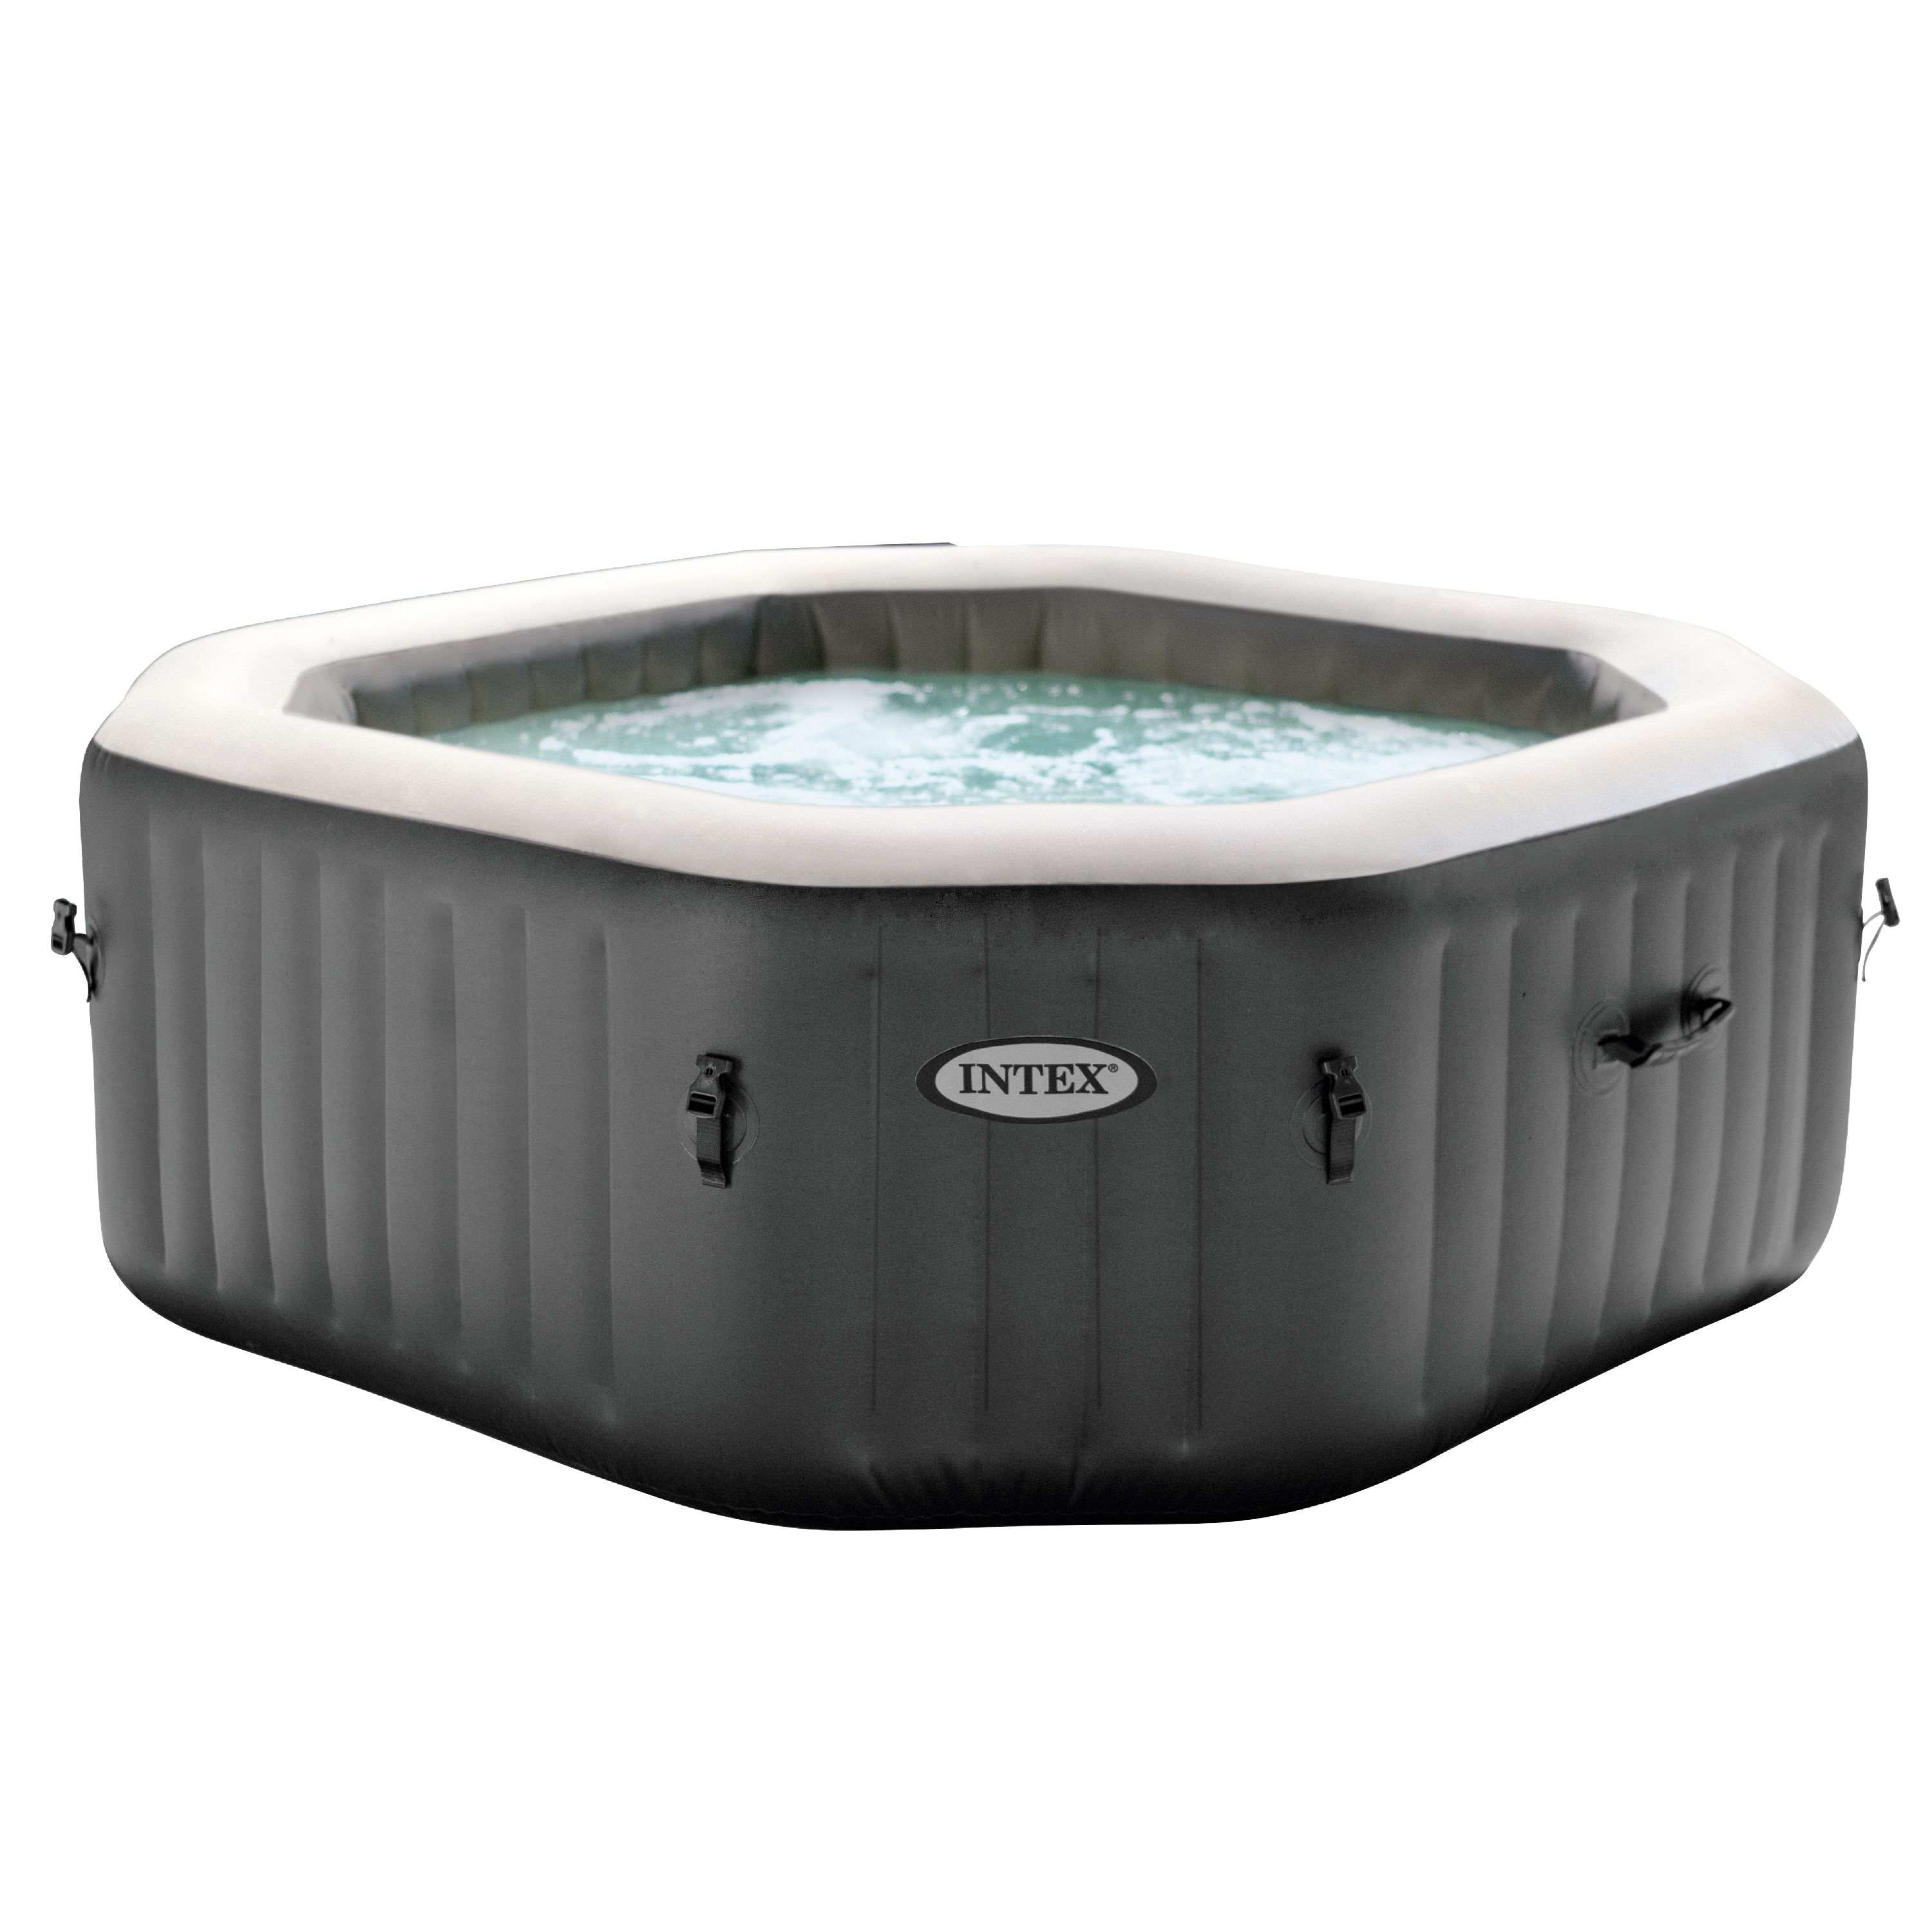 Intex 120 Bubble Jets 4-Person Octagonal Portable Inflatable Hot Tub Spa, Gray - image 1 of 9